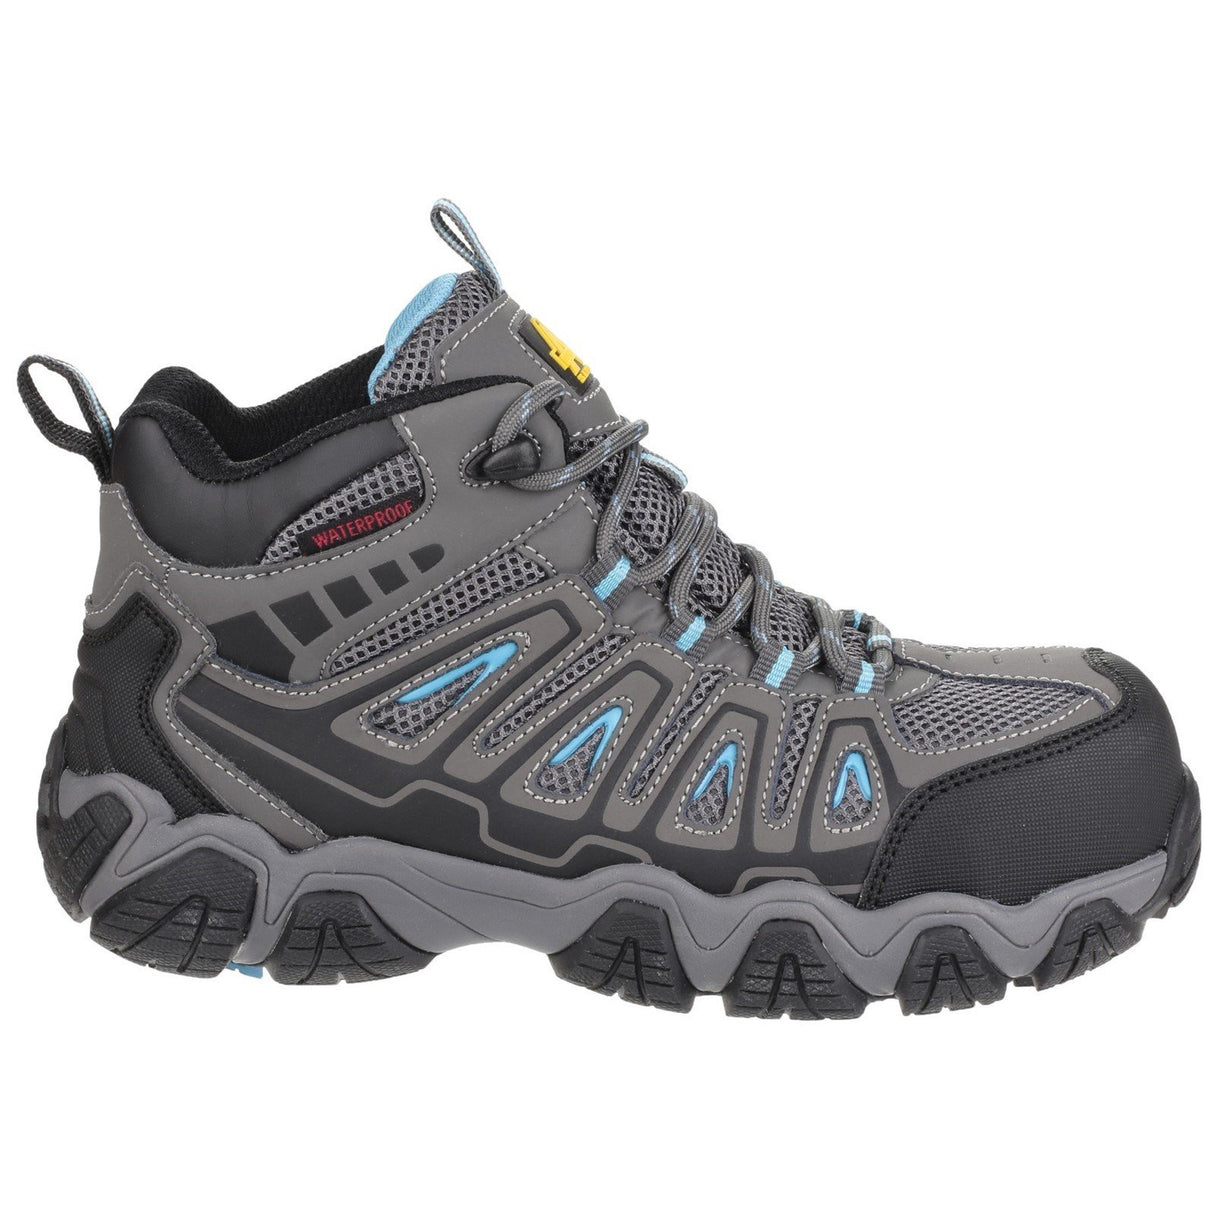 Amblers Safety Ladies Safety Hiking Boots